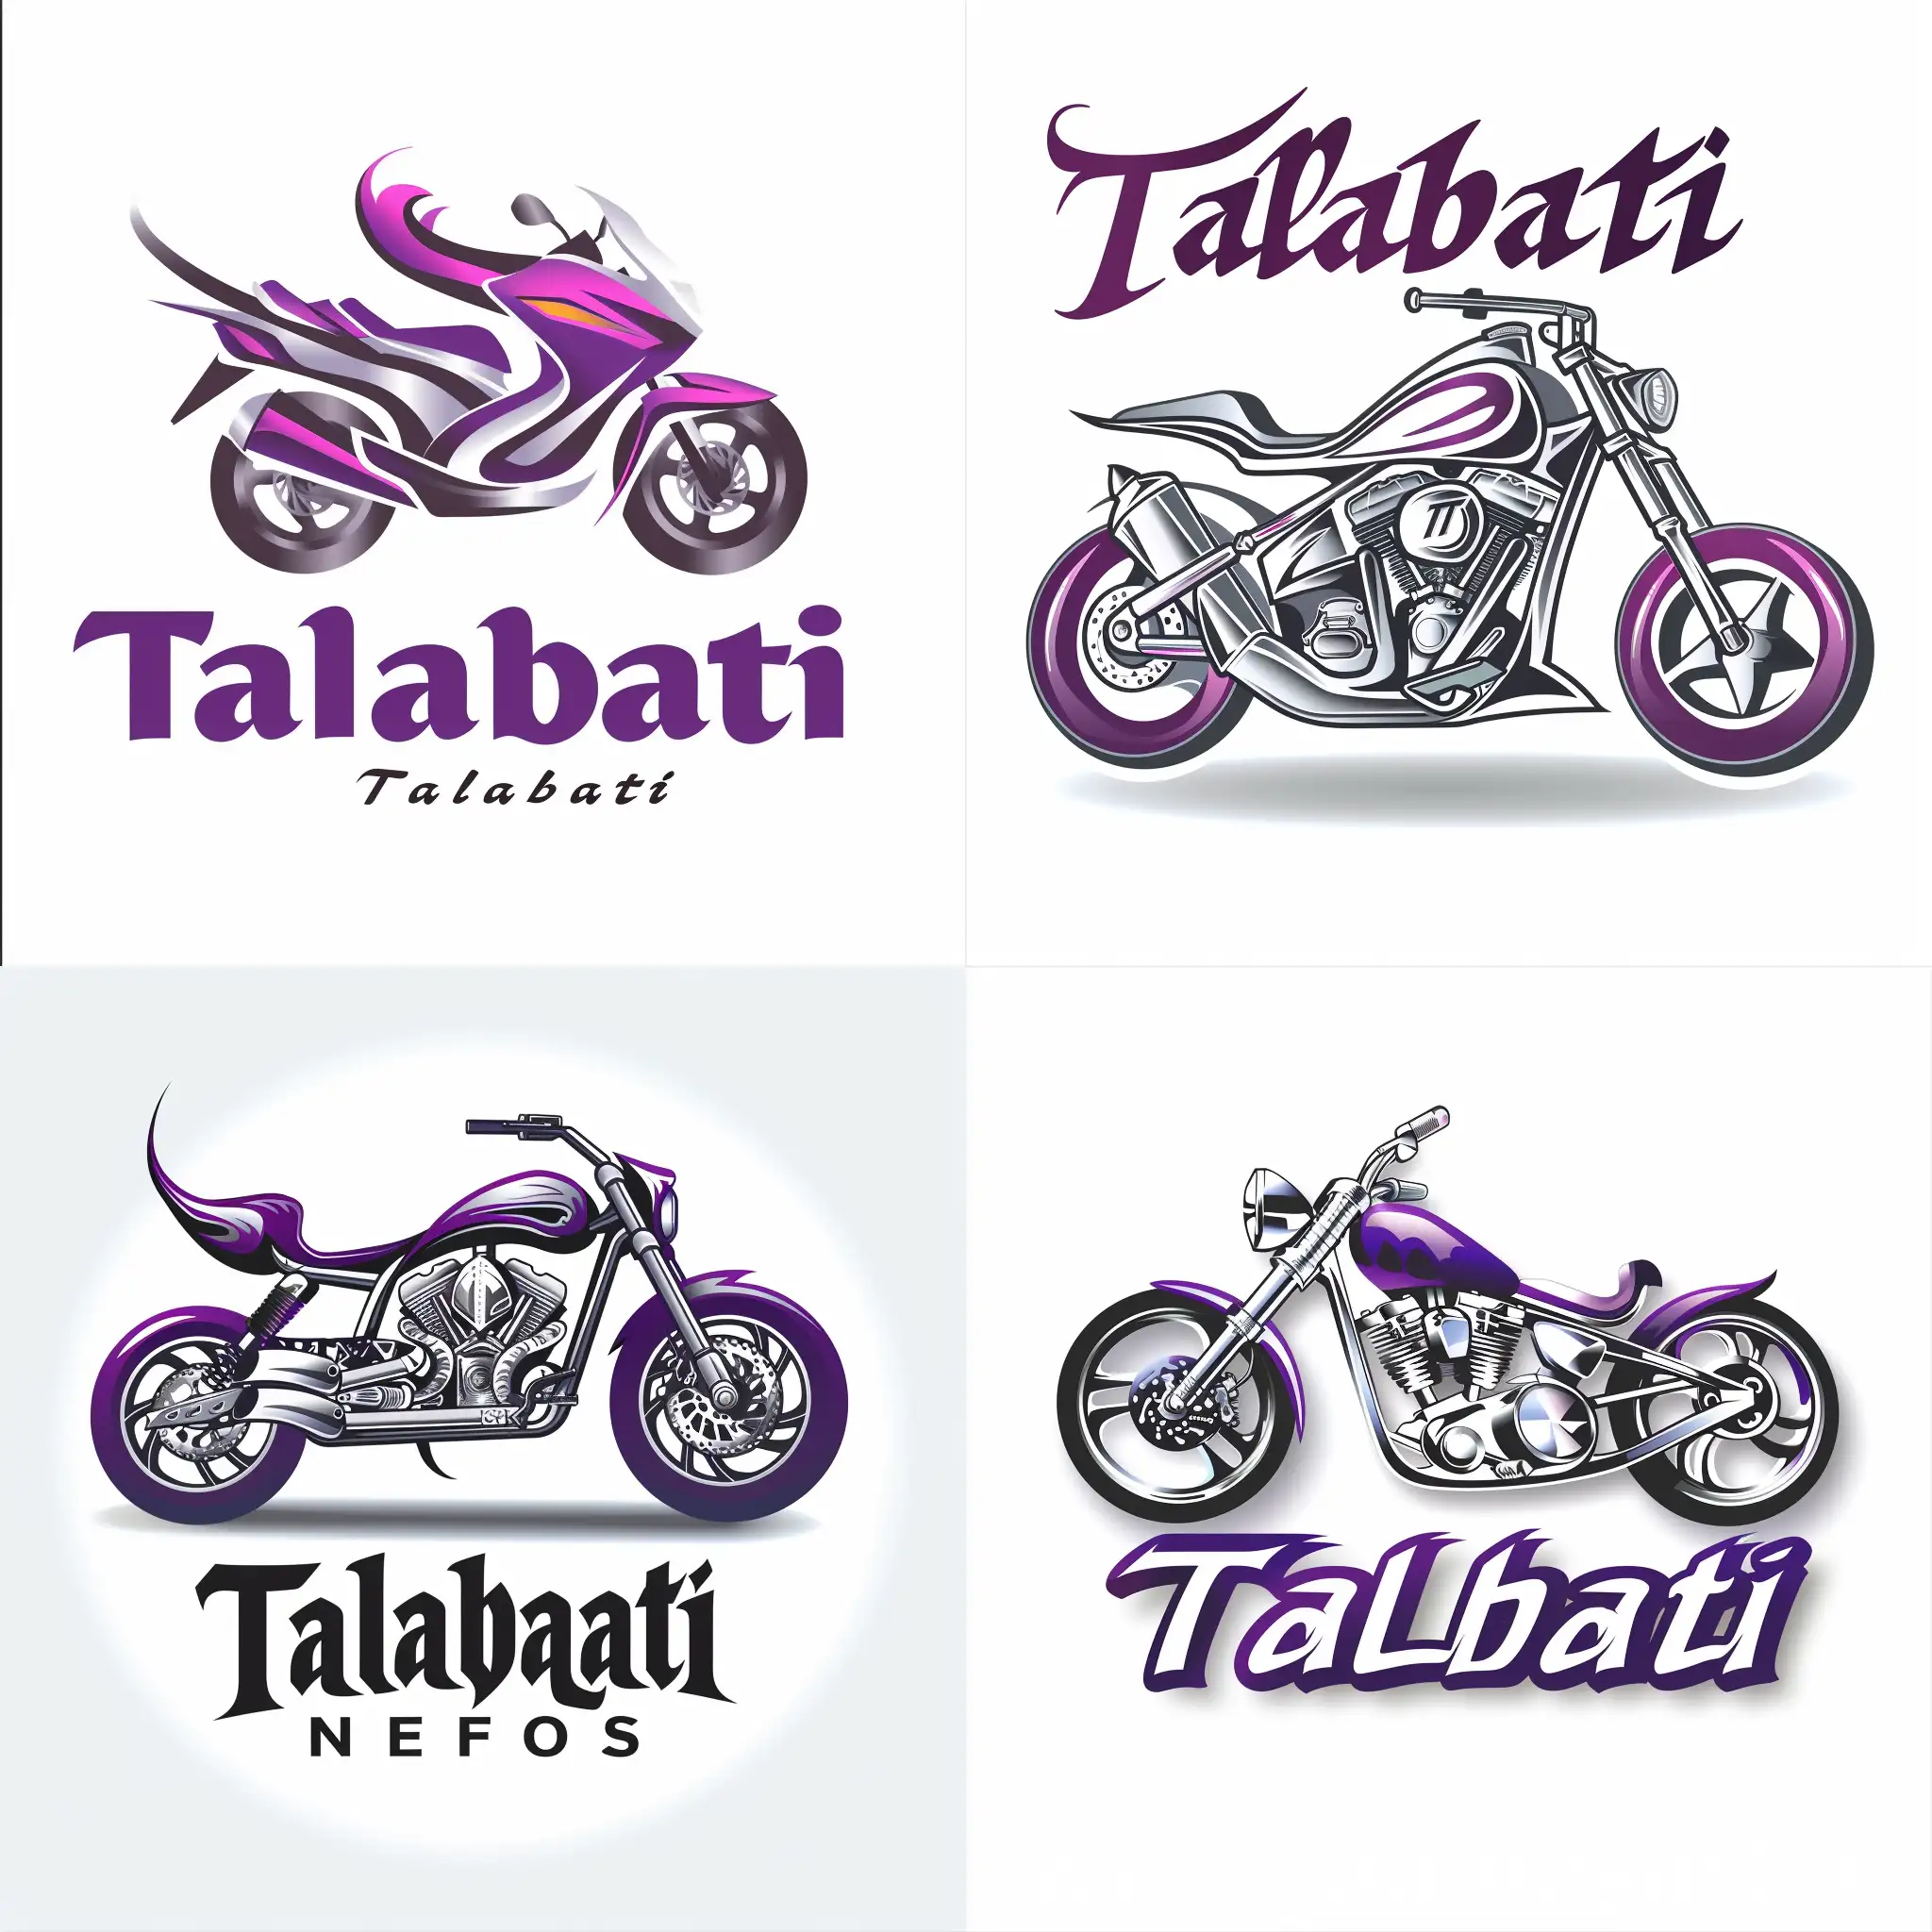 The image is a professional logo for a motorcycle delivery company. The image is supposed to be modern and more expressive of the name. The colors consist of purple and silver with the addition of the name “Talabati” along with the logo and a white background.